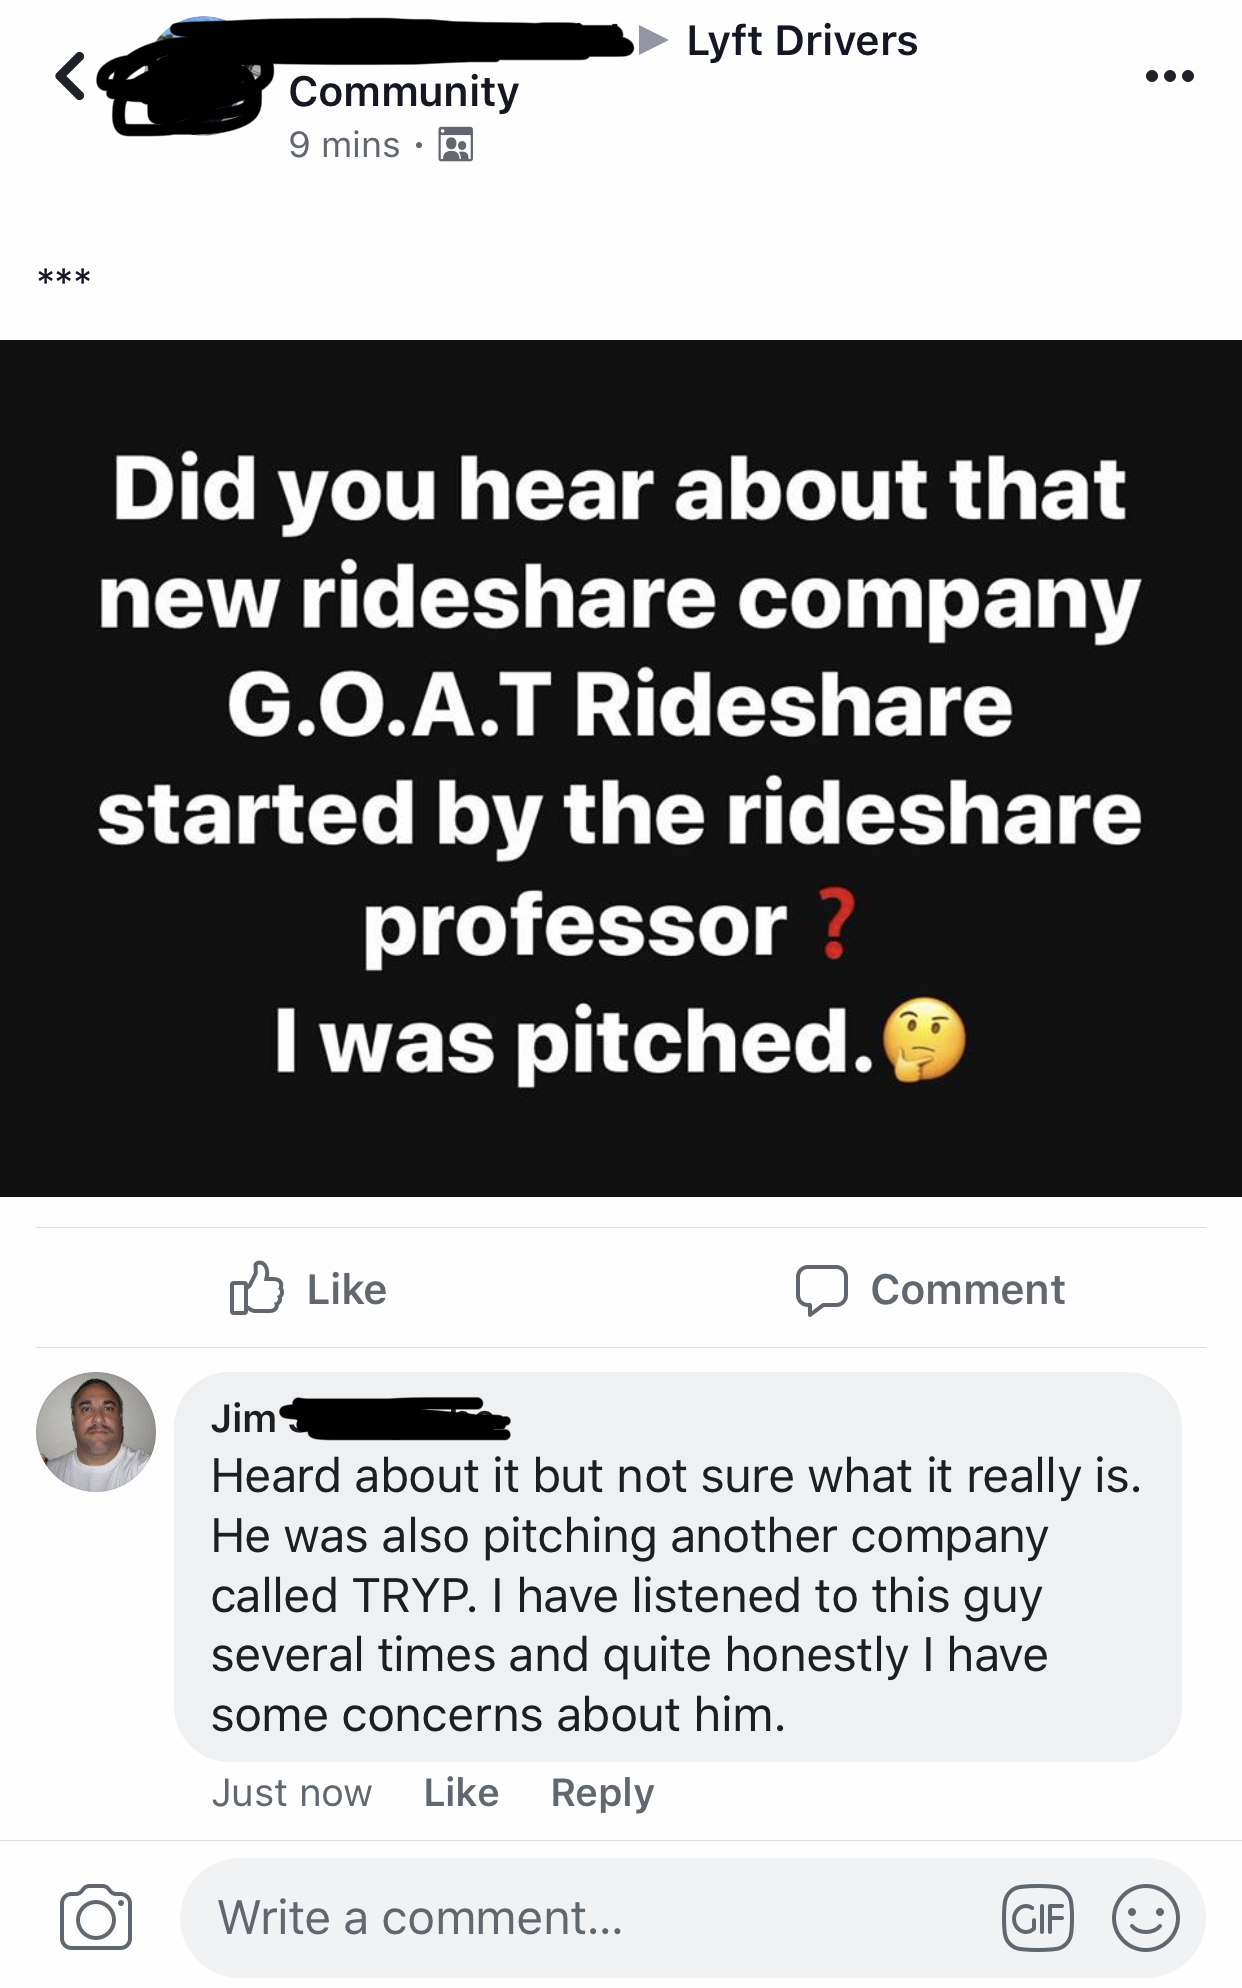 Goat Rideshare can't be trusted